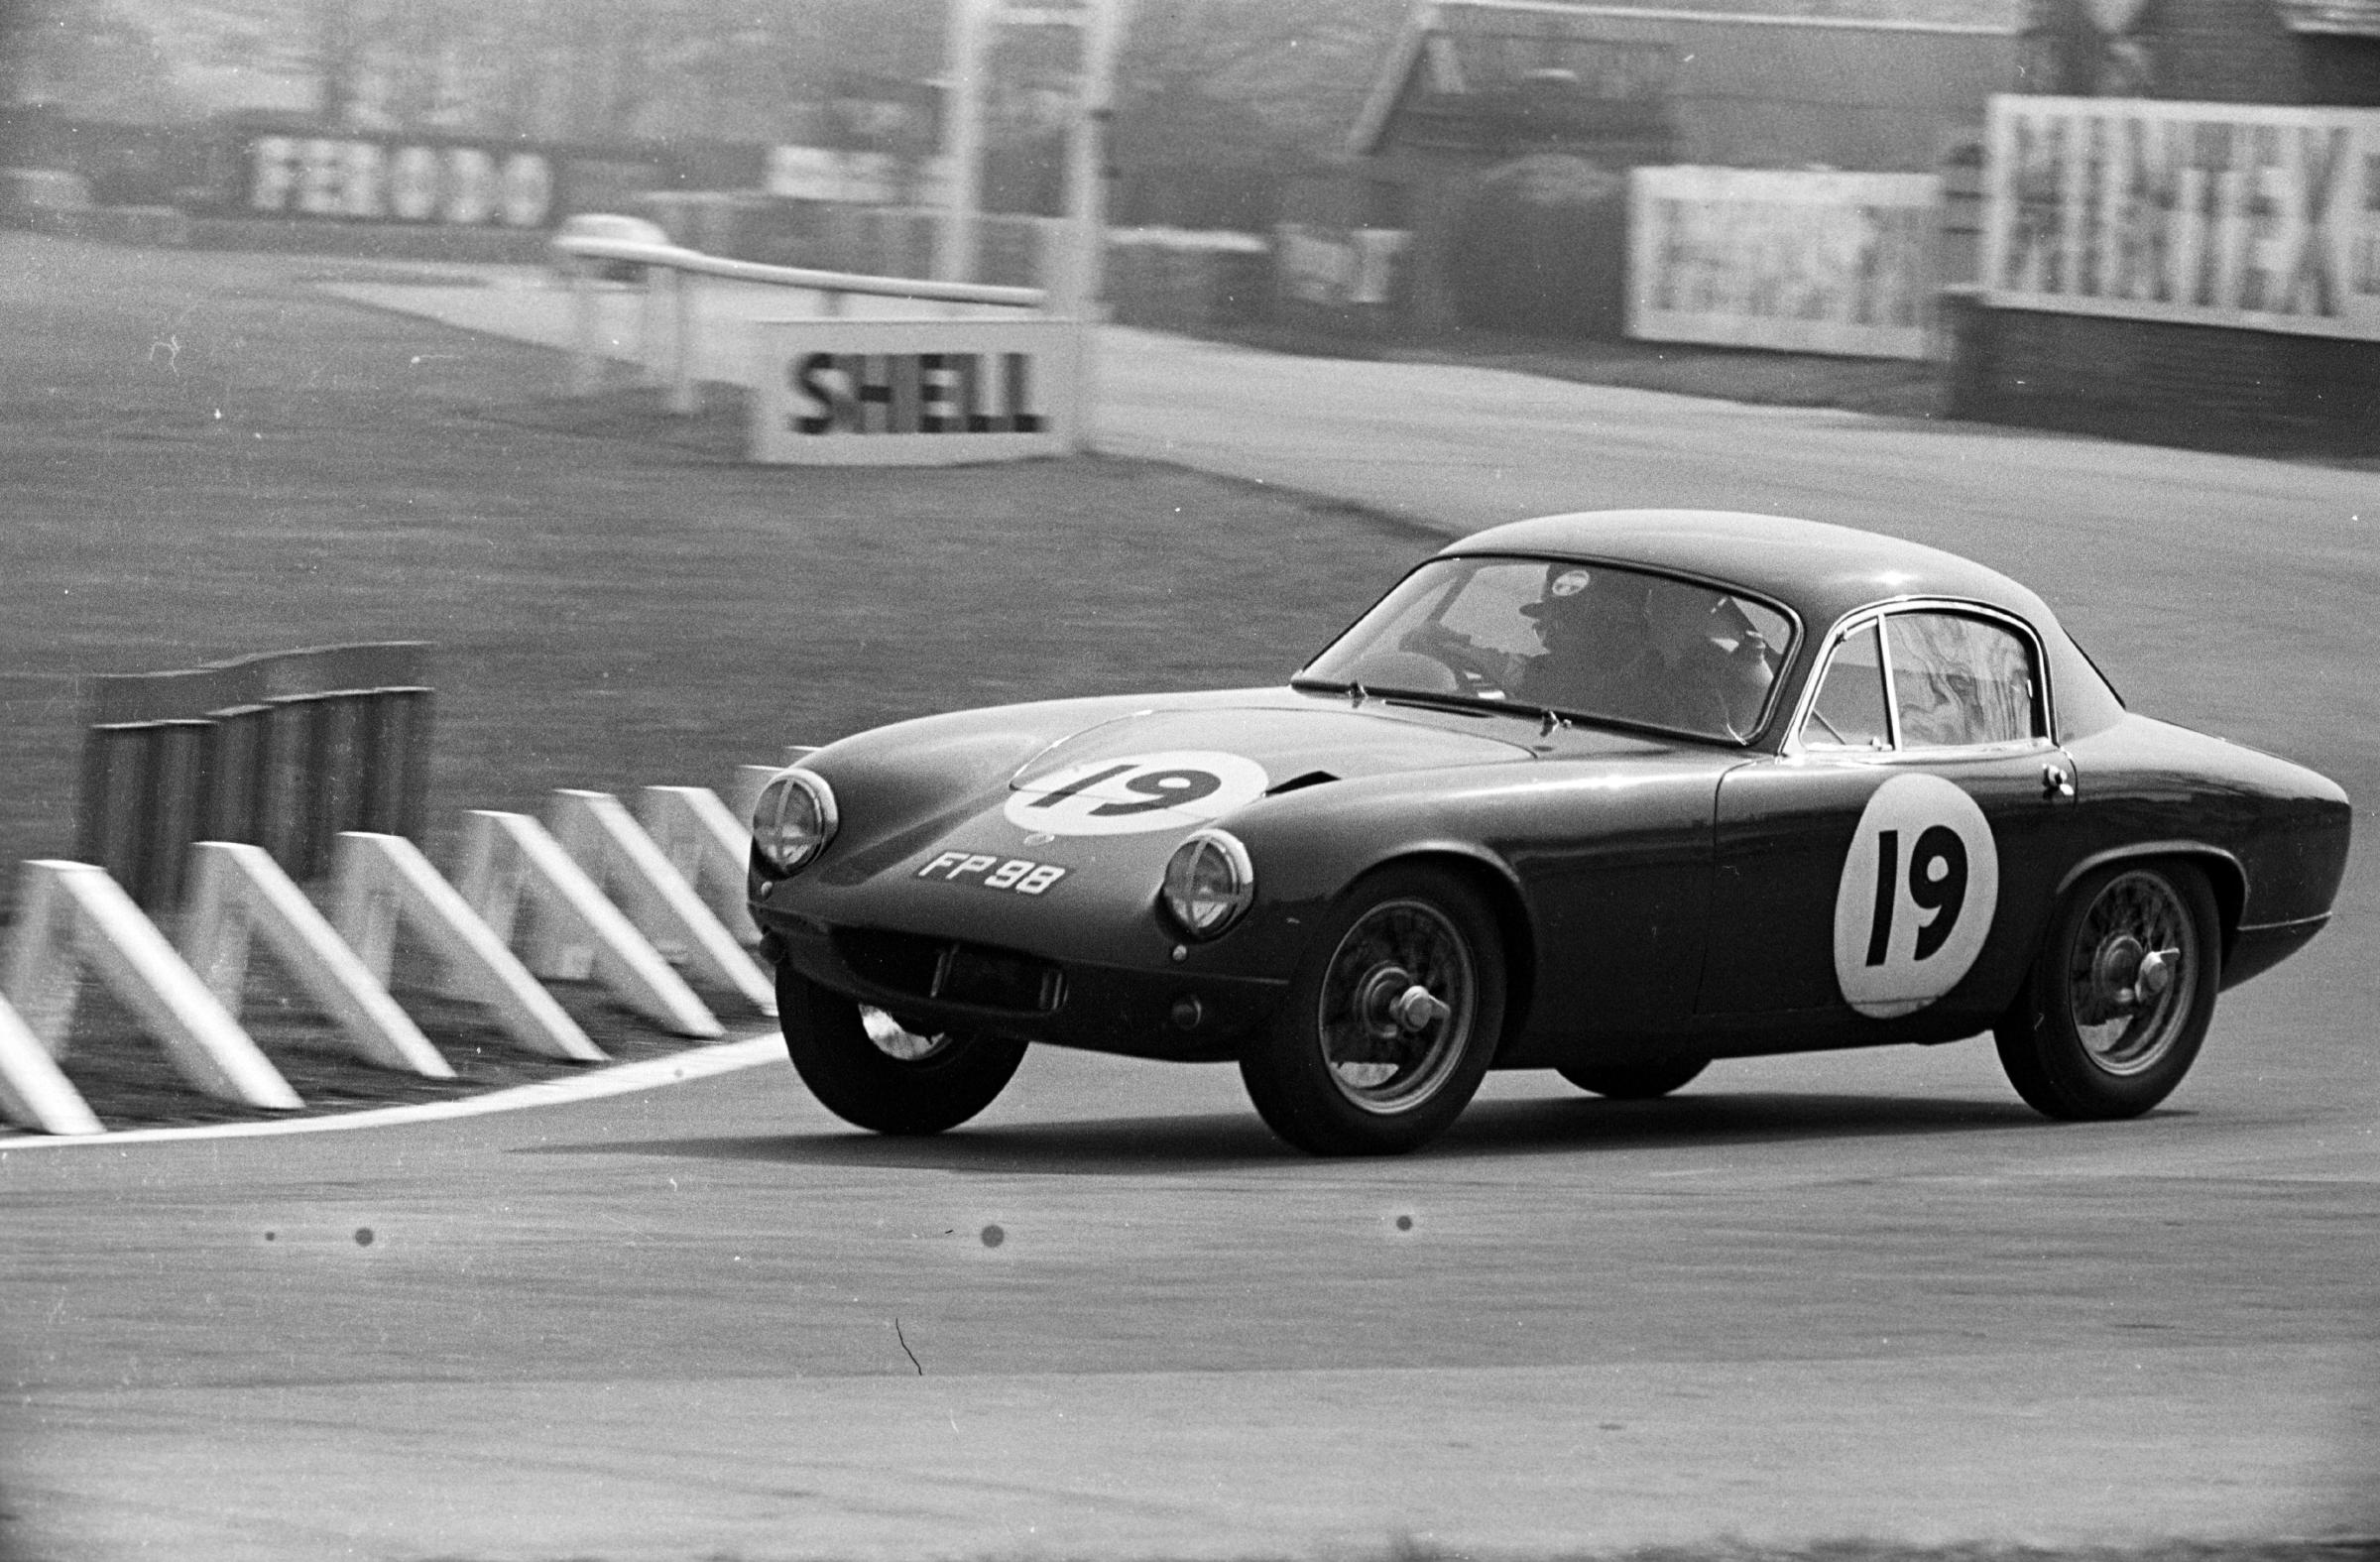 A Lotus Elite racing into Tatt's Corner in the Aintree 200 race, England 30 April 1960. (Photo by: GP Library/UIG via Getty Images)